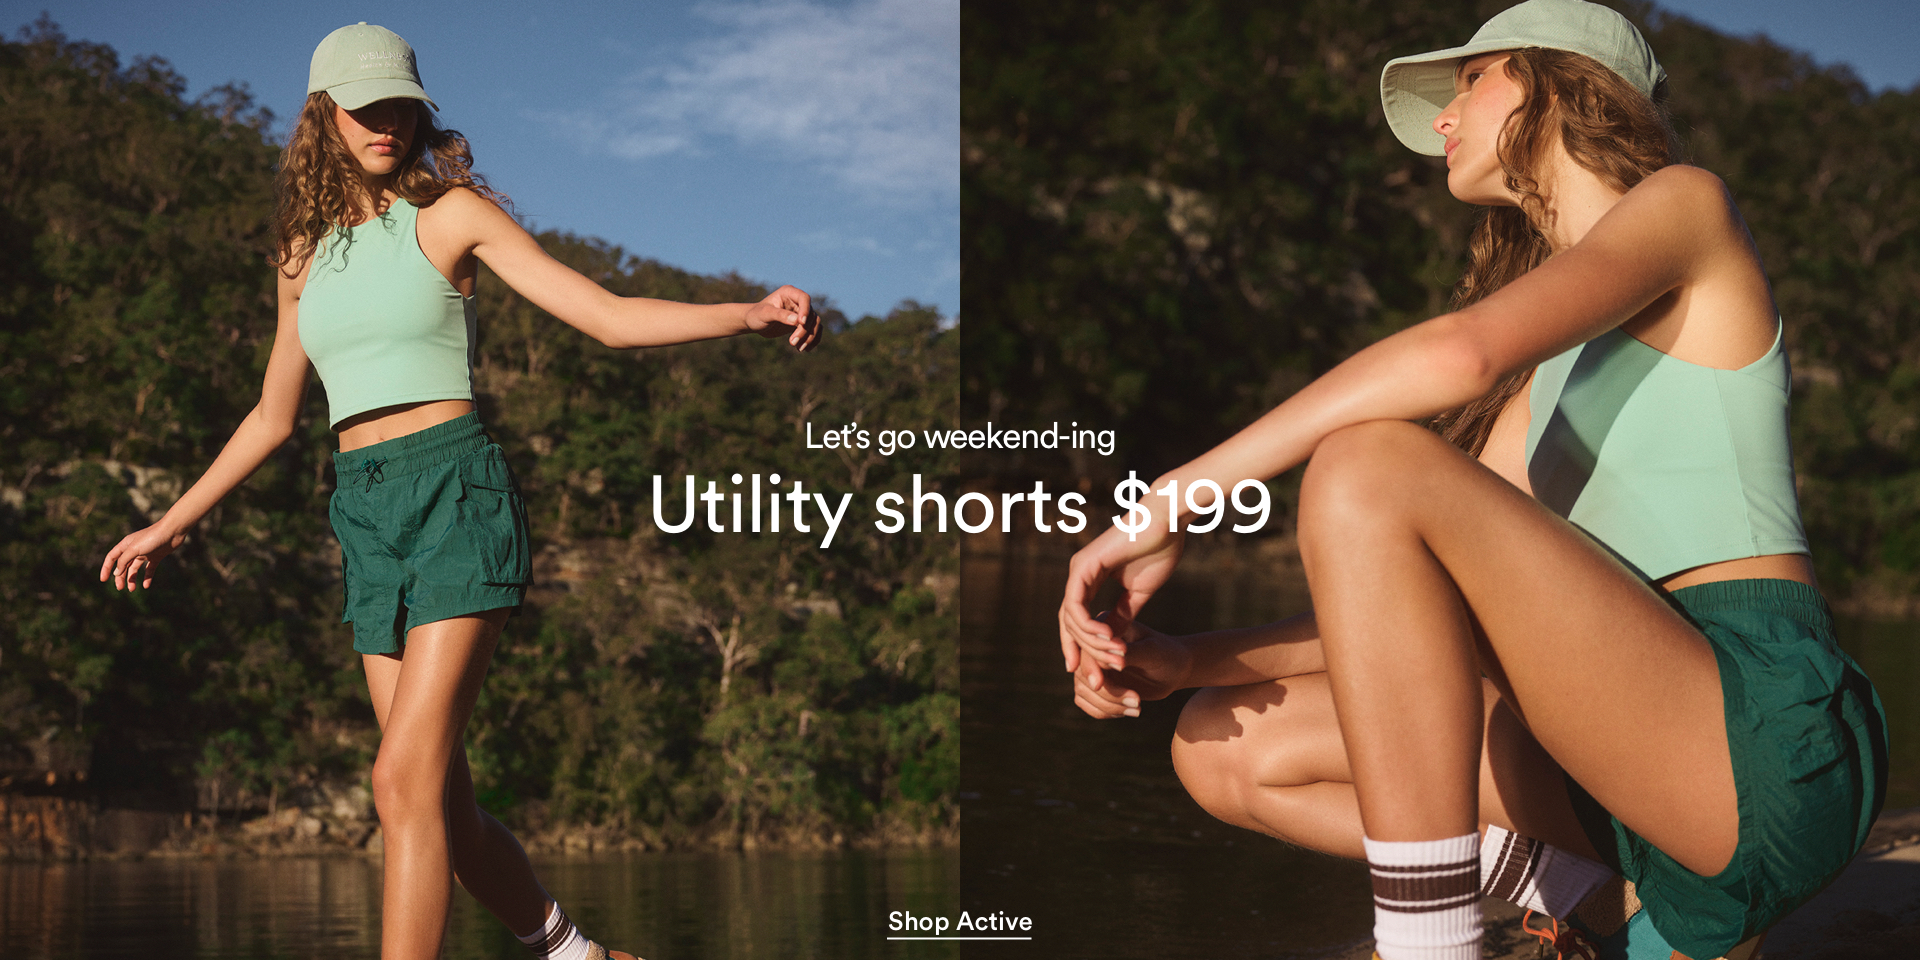 Let's go weekend-ing. Utility shorts $199. Click to Shop New in Active.